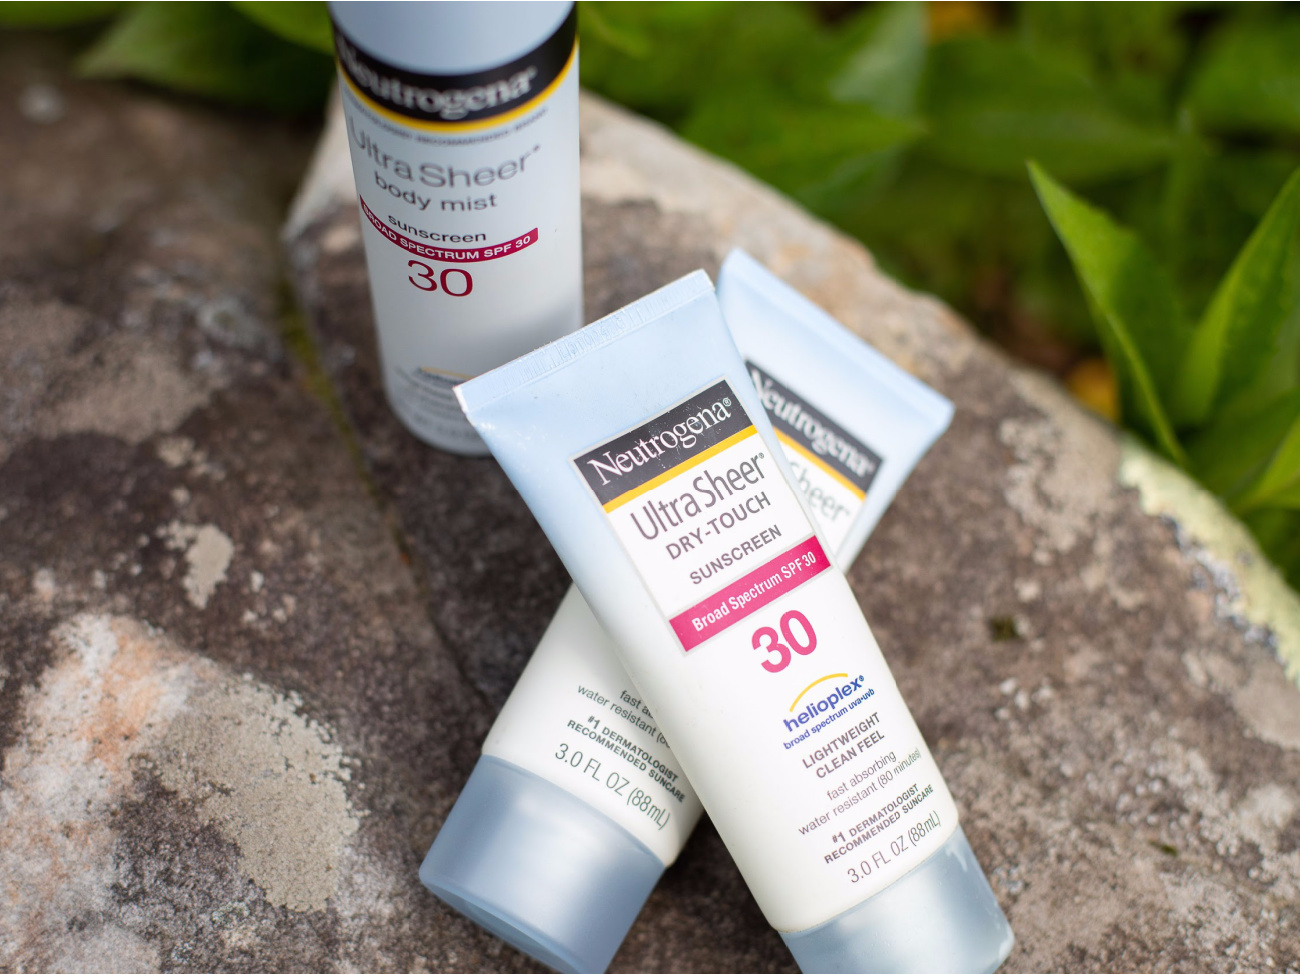 Neutrogena Sun Care Products As Low As $5.66 At Kroger (Regular Price $10.99)